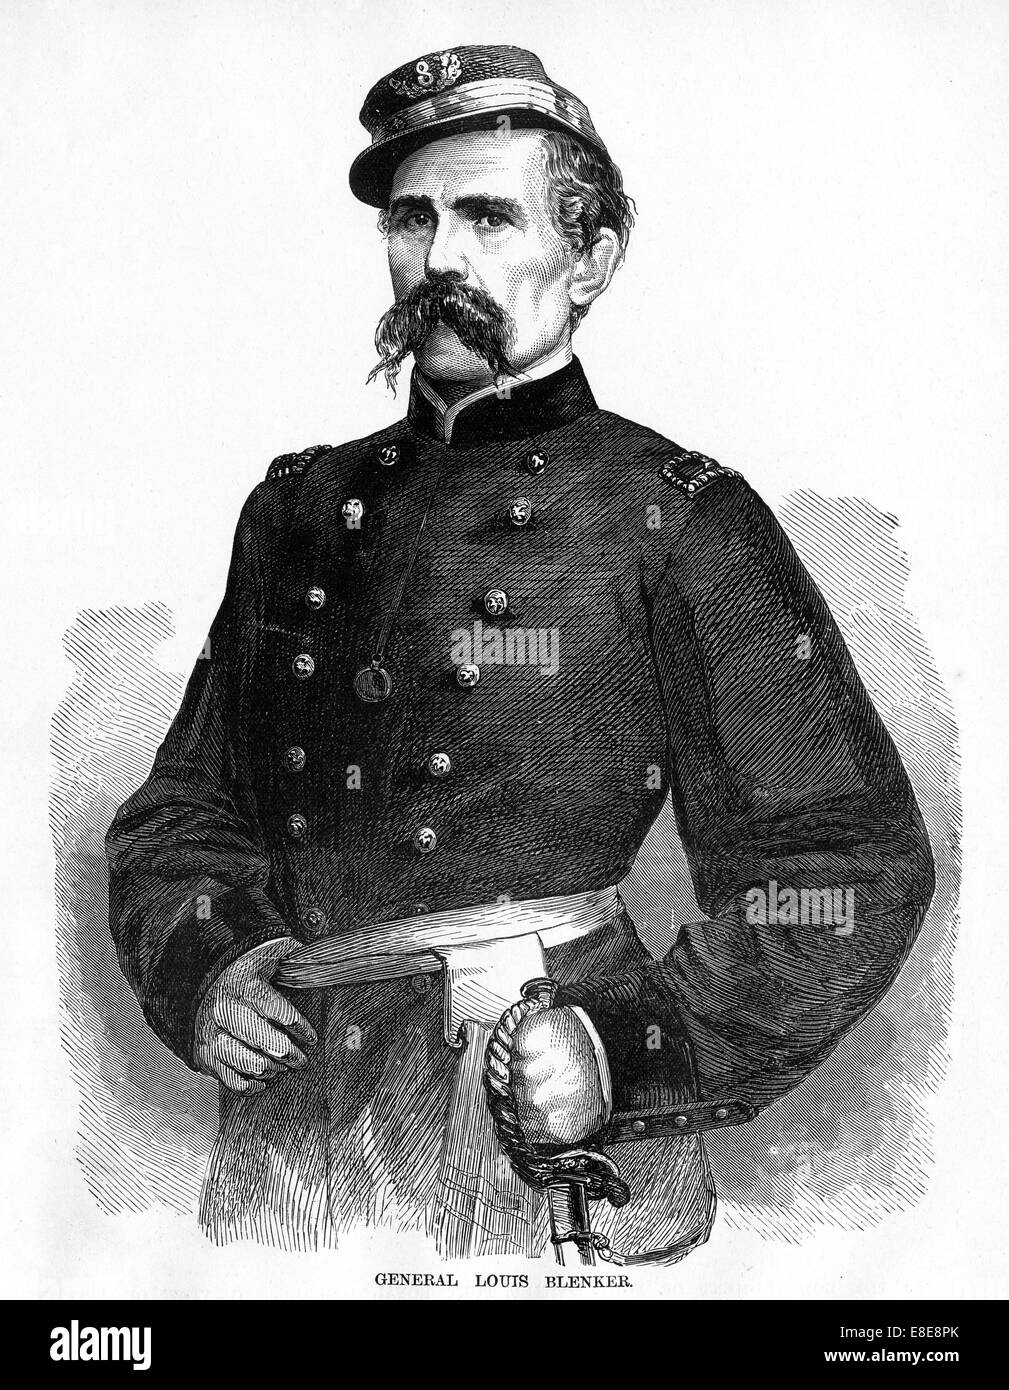 Engraving of General Louis Blenker from 'Famous Leaders and Battle Scenes of the Civil War,' Published in 1864. Stock Photo